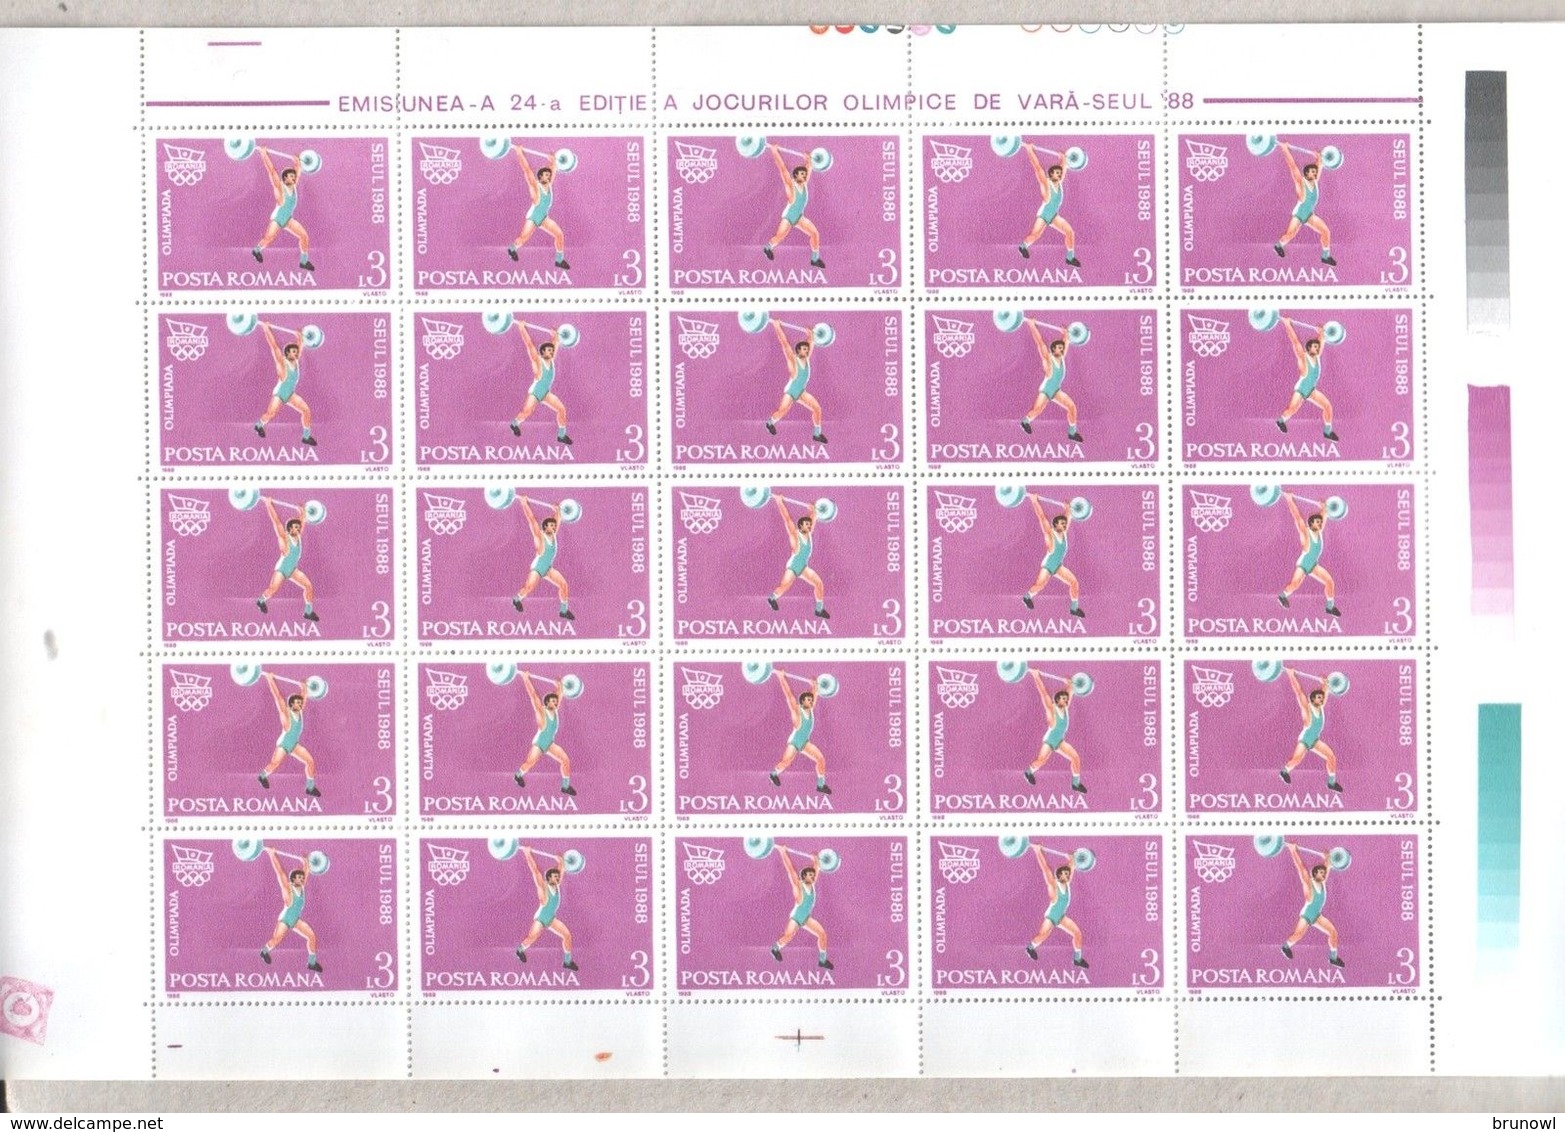 Romania 1988 Full Sheet 3 Lei Seoul Summer Olympics Weight Lifting Stamps MNH - Full Sheets & Multiples